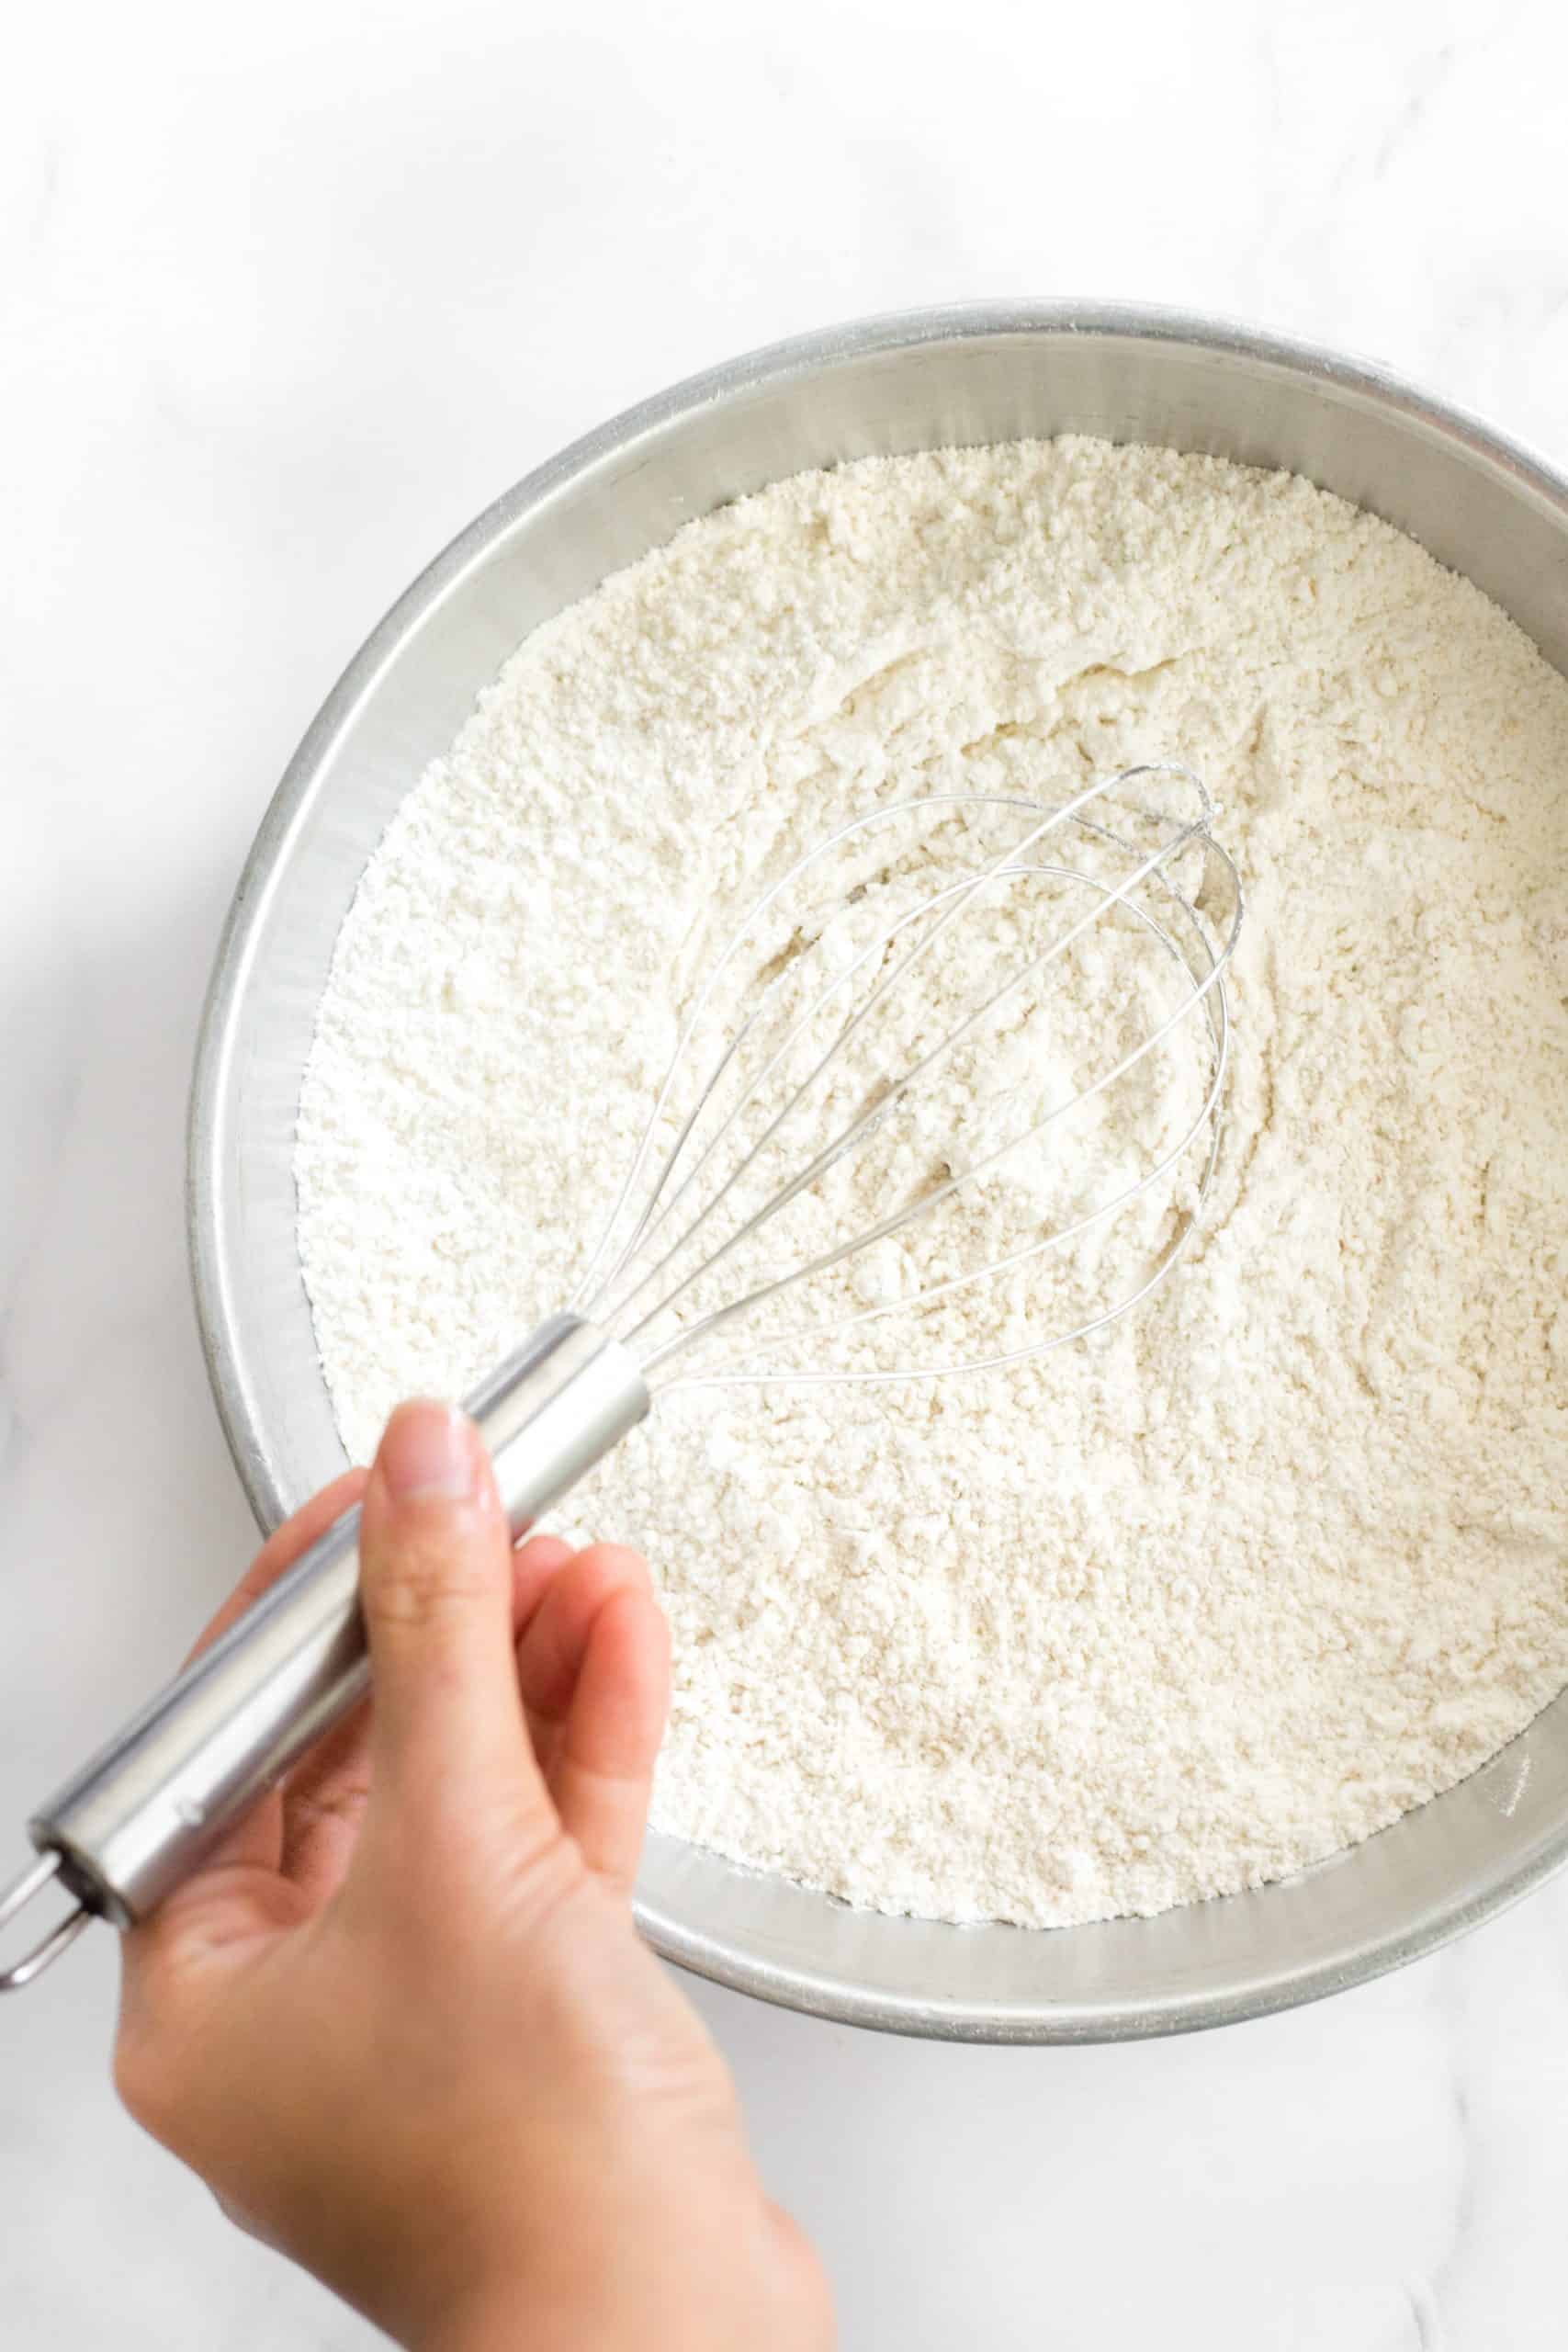 Hand whisking dry ingredients in a metal bowl.